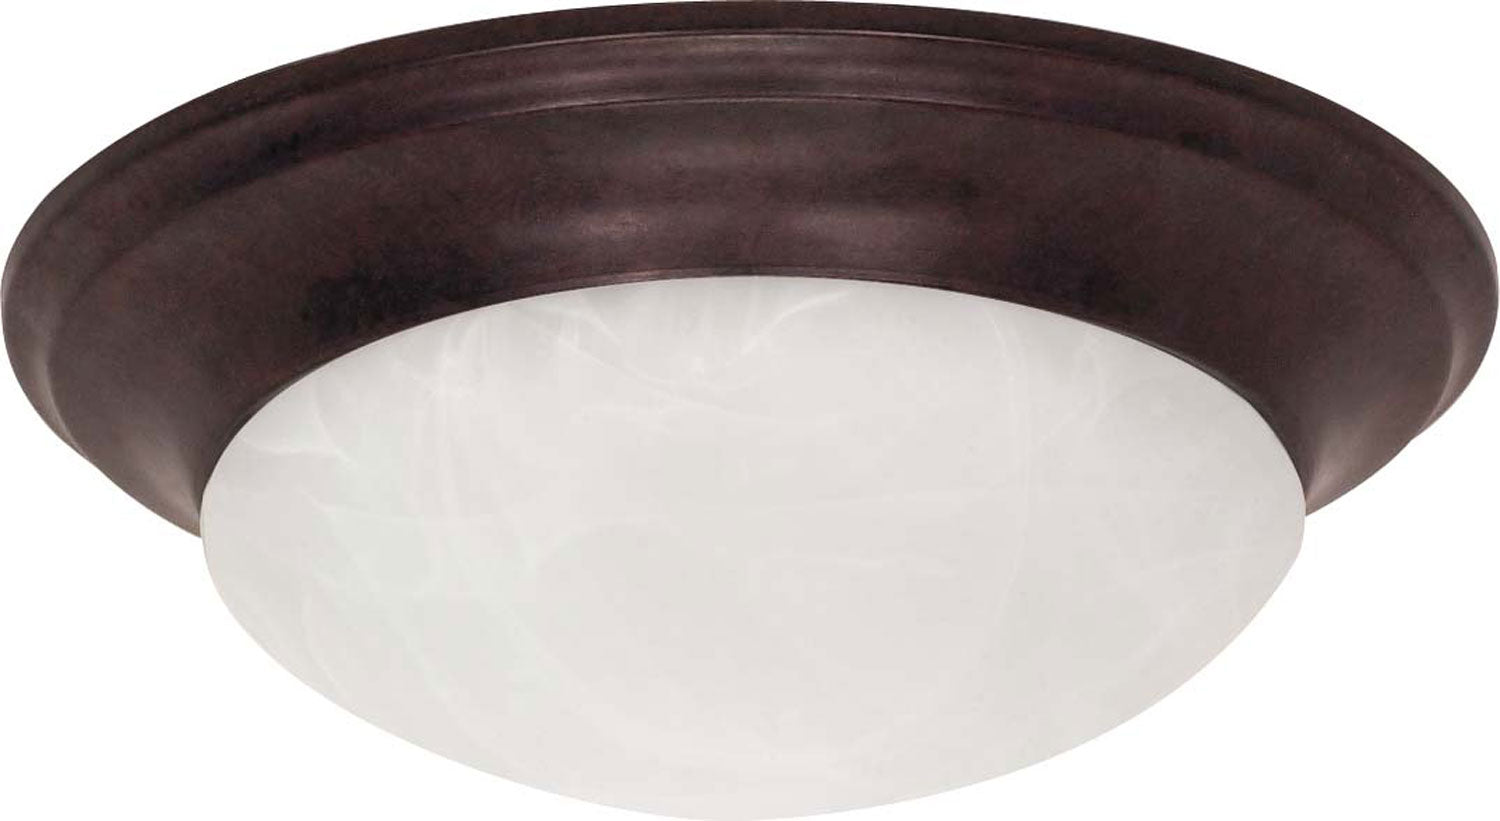 Nuvo Twist and Lock Old Bronze 60-280 Ceiling Light - Old Bronze